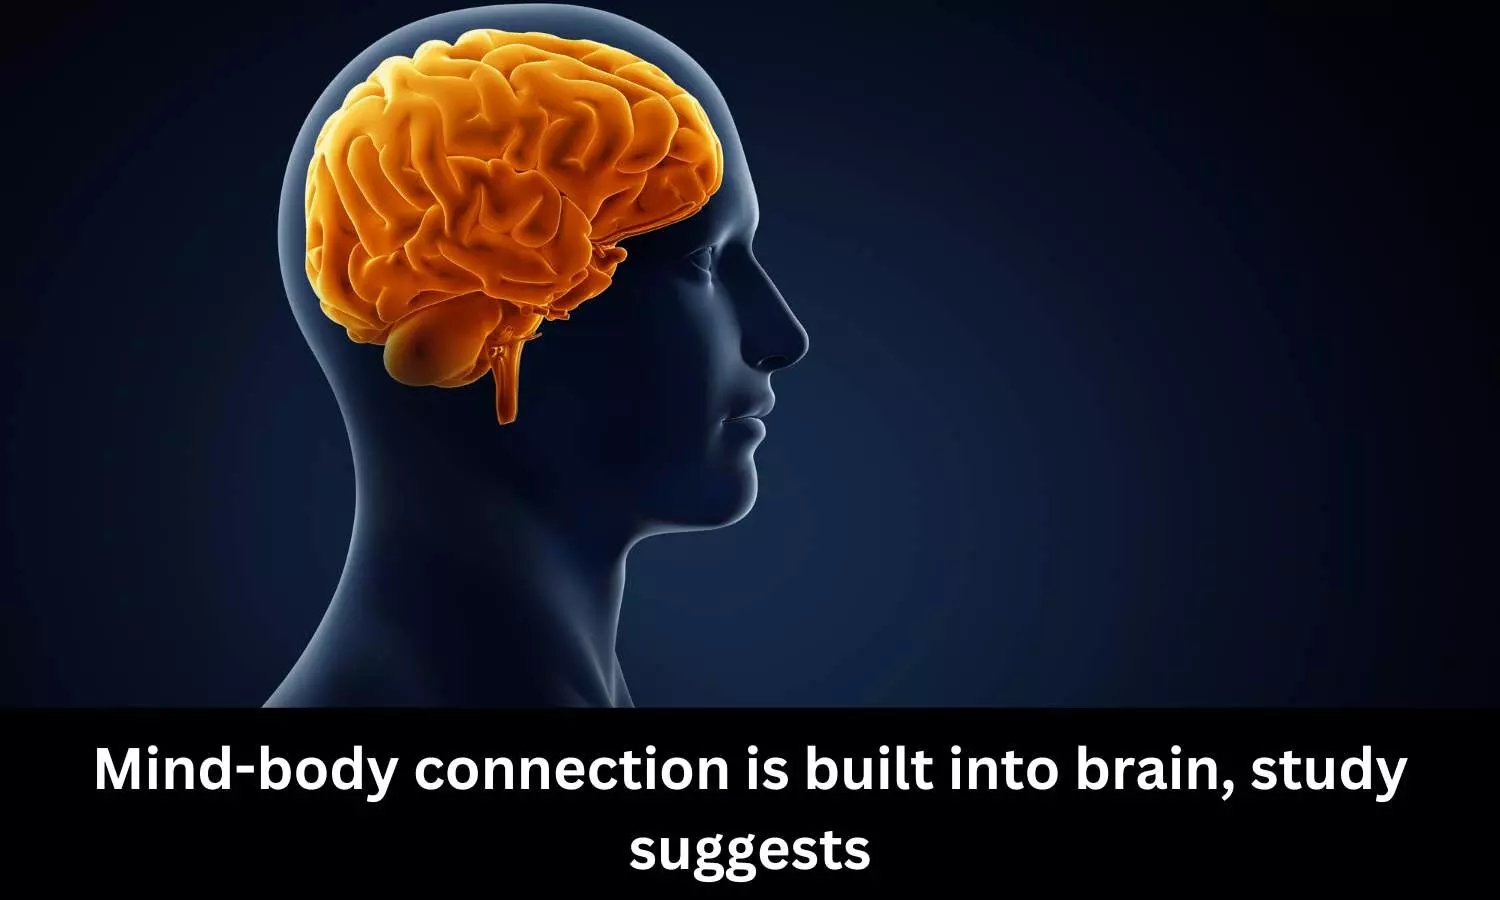 Mind-body connection is built into brain: Study